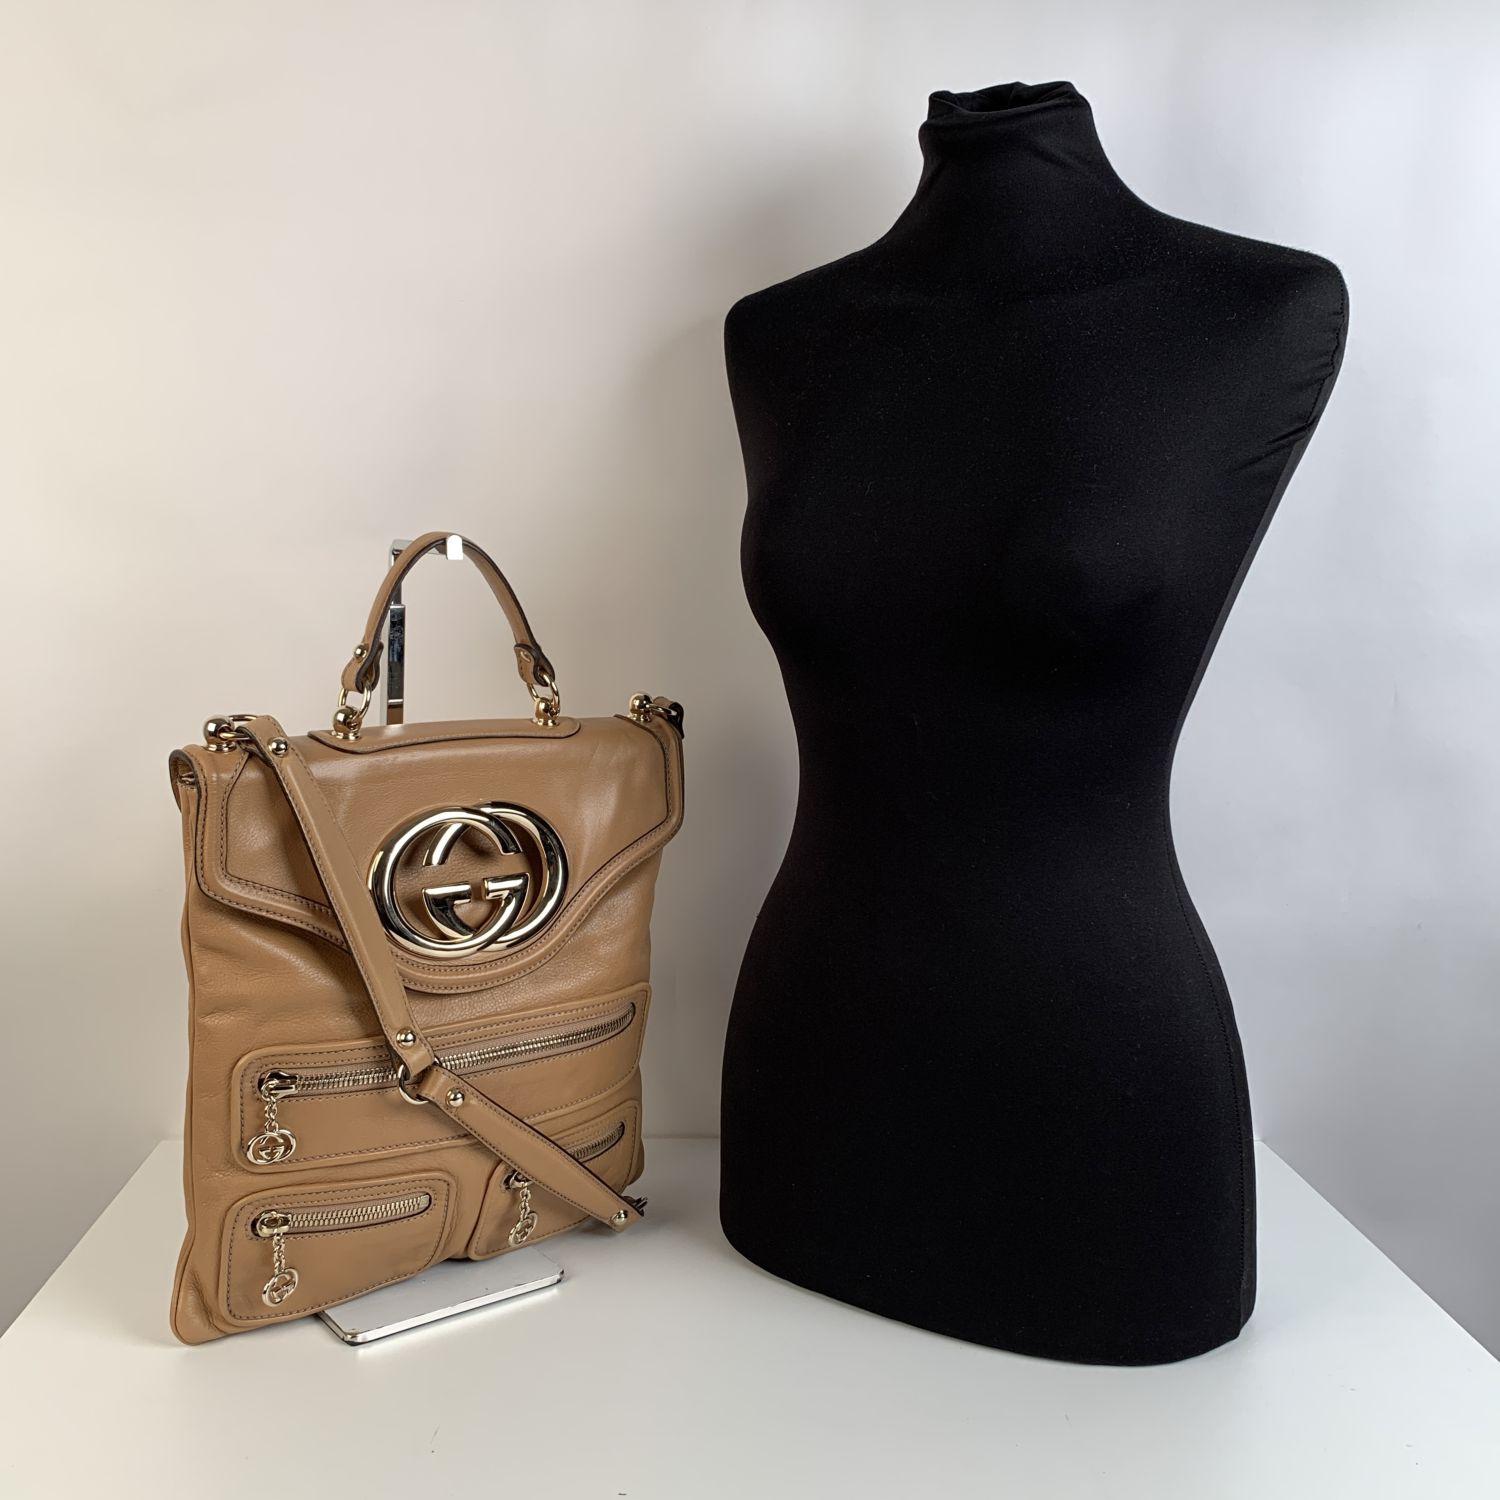 We offer Certificate of Authenticity provided by Entrupy for this item at no further cost.

Gucci beige leather 'Britt' Messenger Bag with a big Gucci logo on the front, in gold-tone metal. It features 3 three zip pockets with GG logo zipper pulls